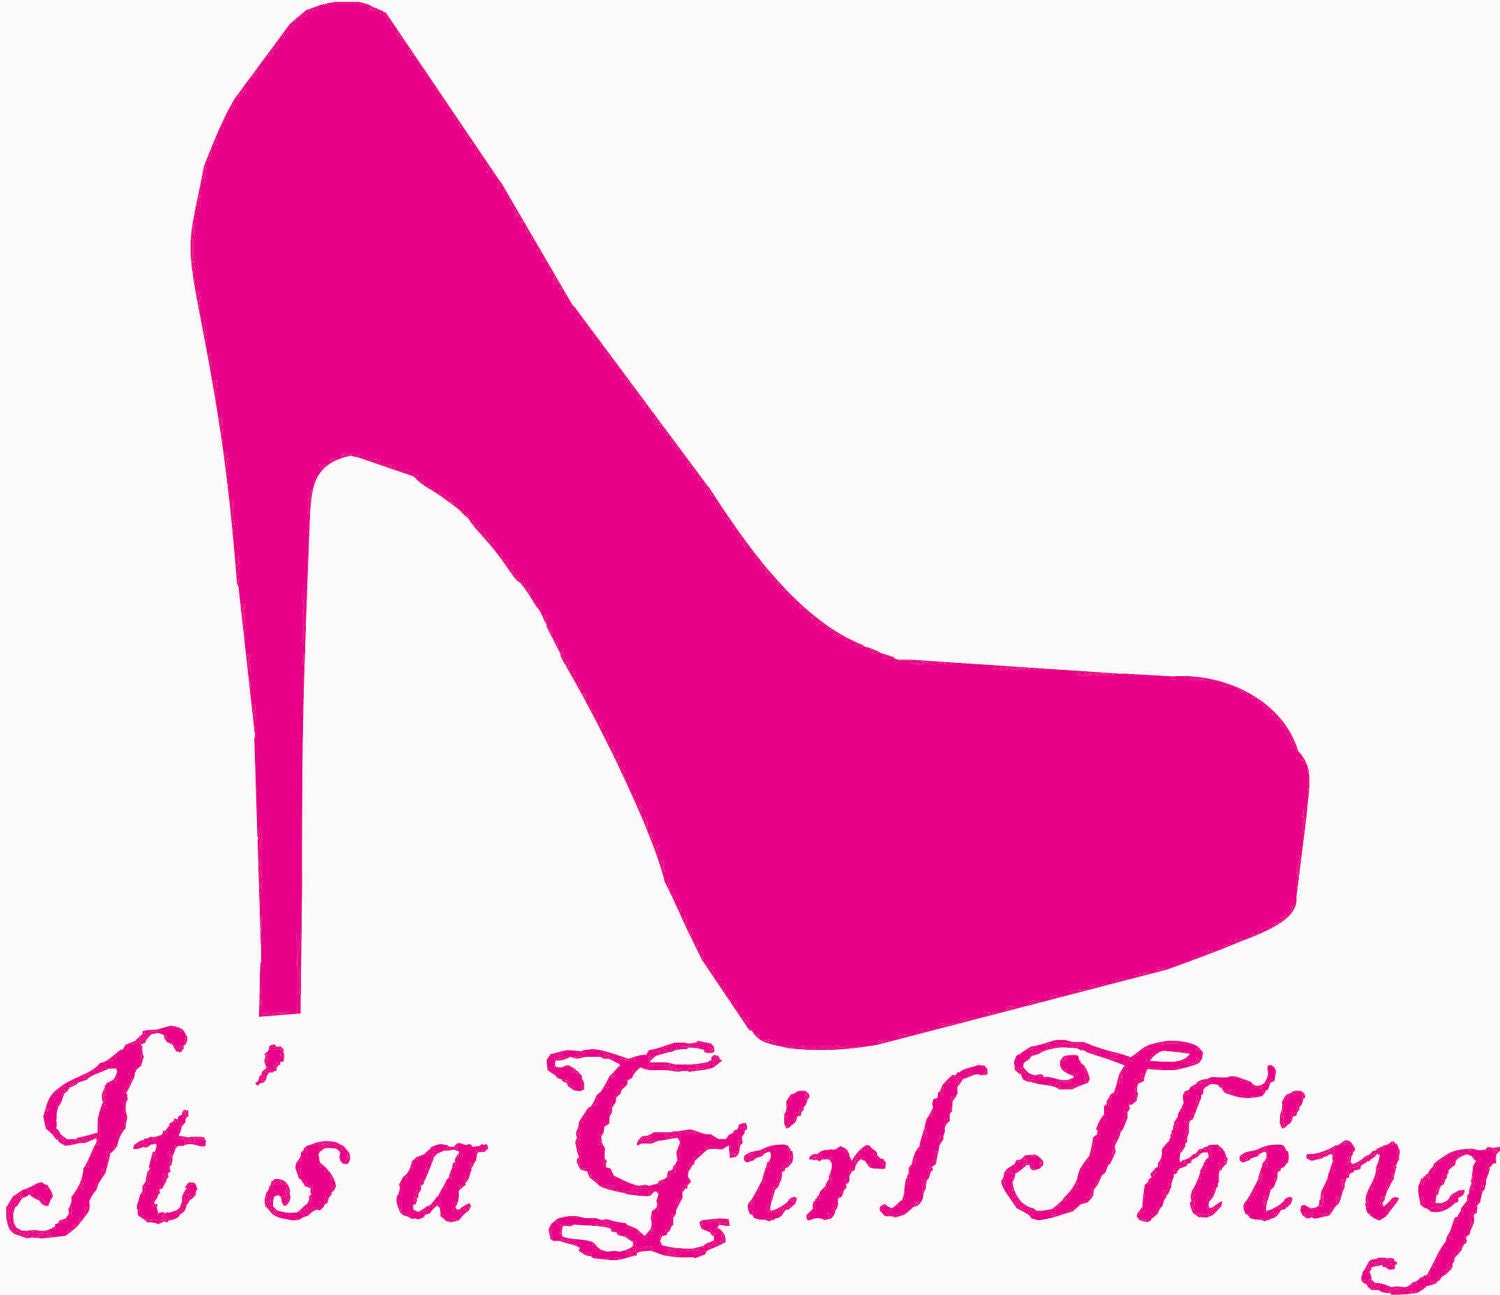 High Heel Shoe Decal Its a Girl Thing, Sticker, Vinyl FREE SHIPPING